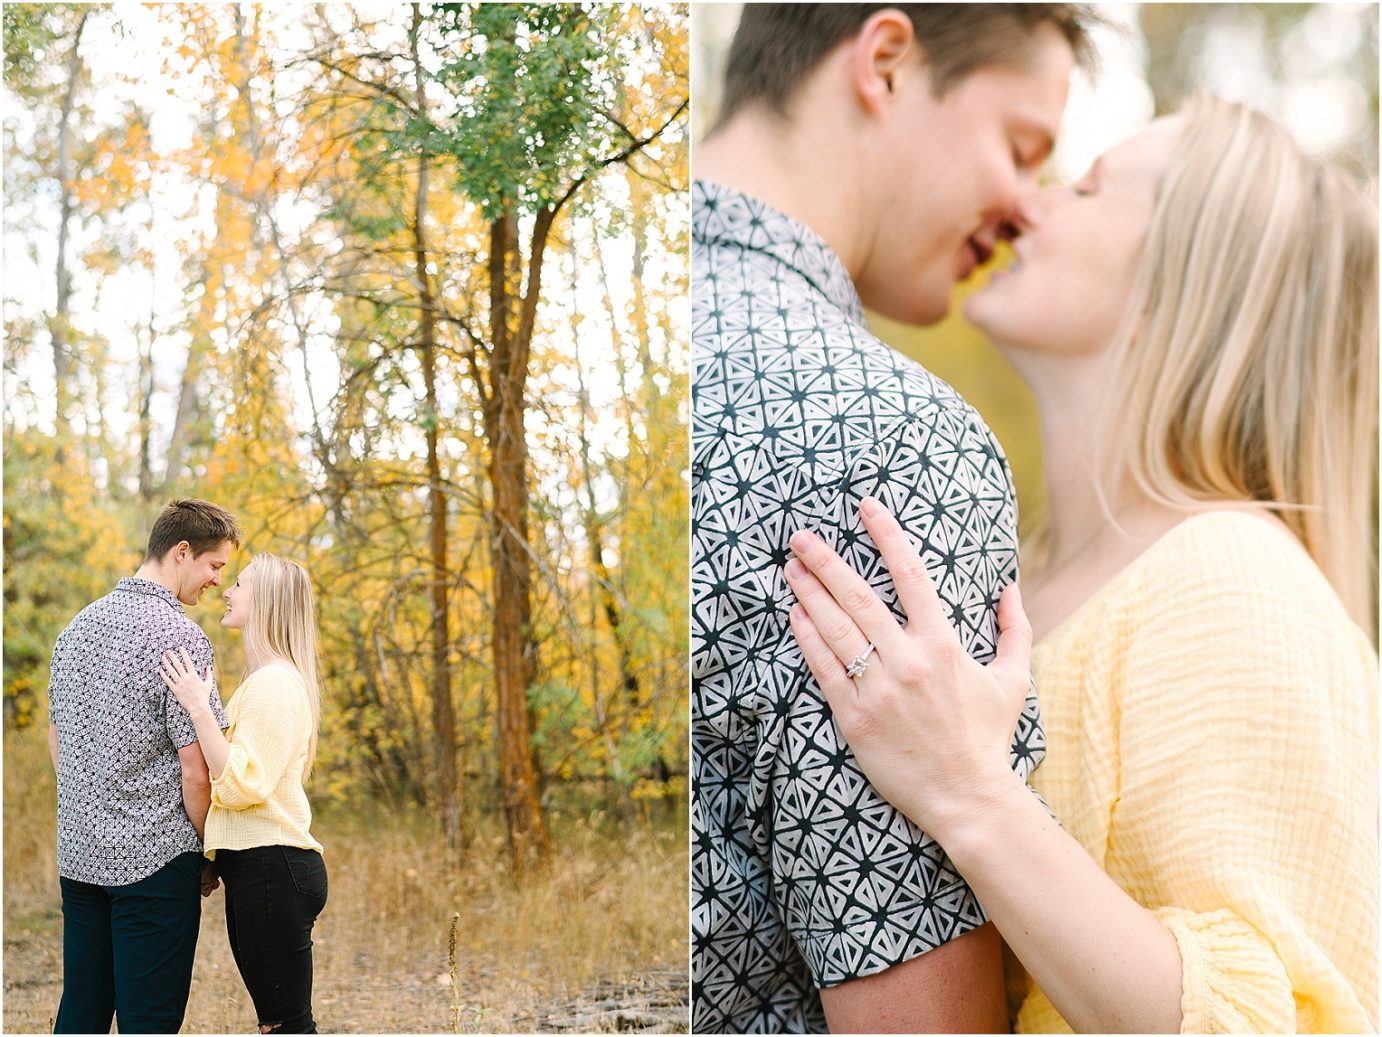 Joyful fall engagement session Cental WA Brad and Jasmine hugging in fall colored trees